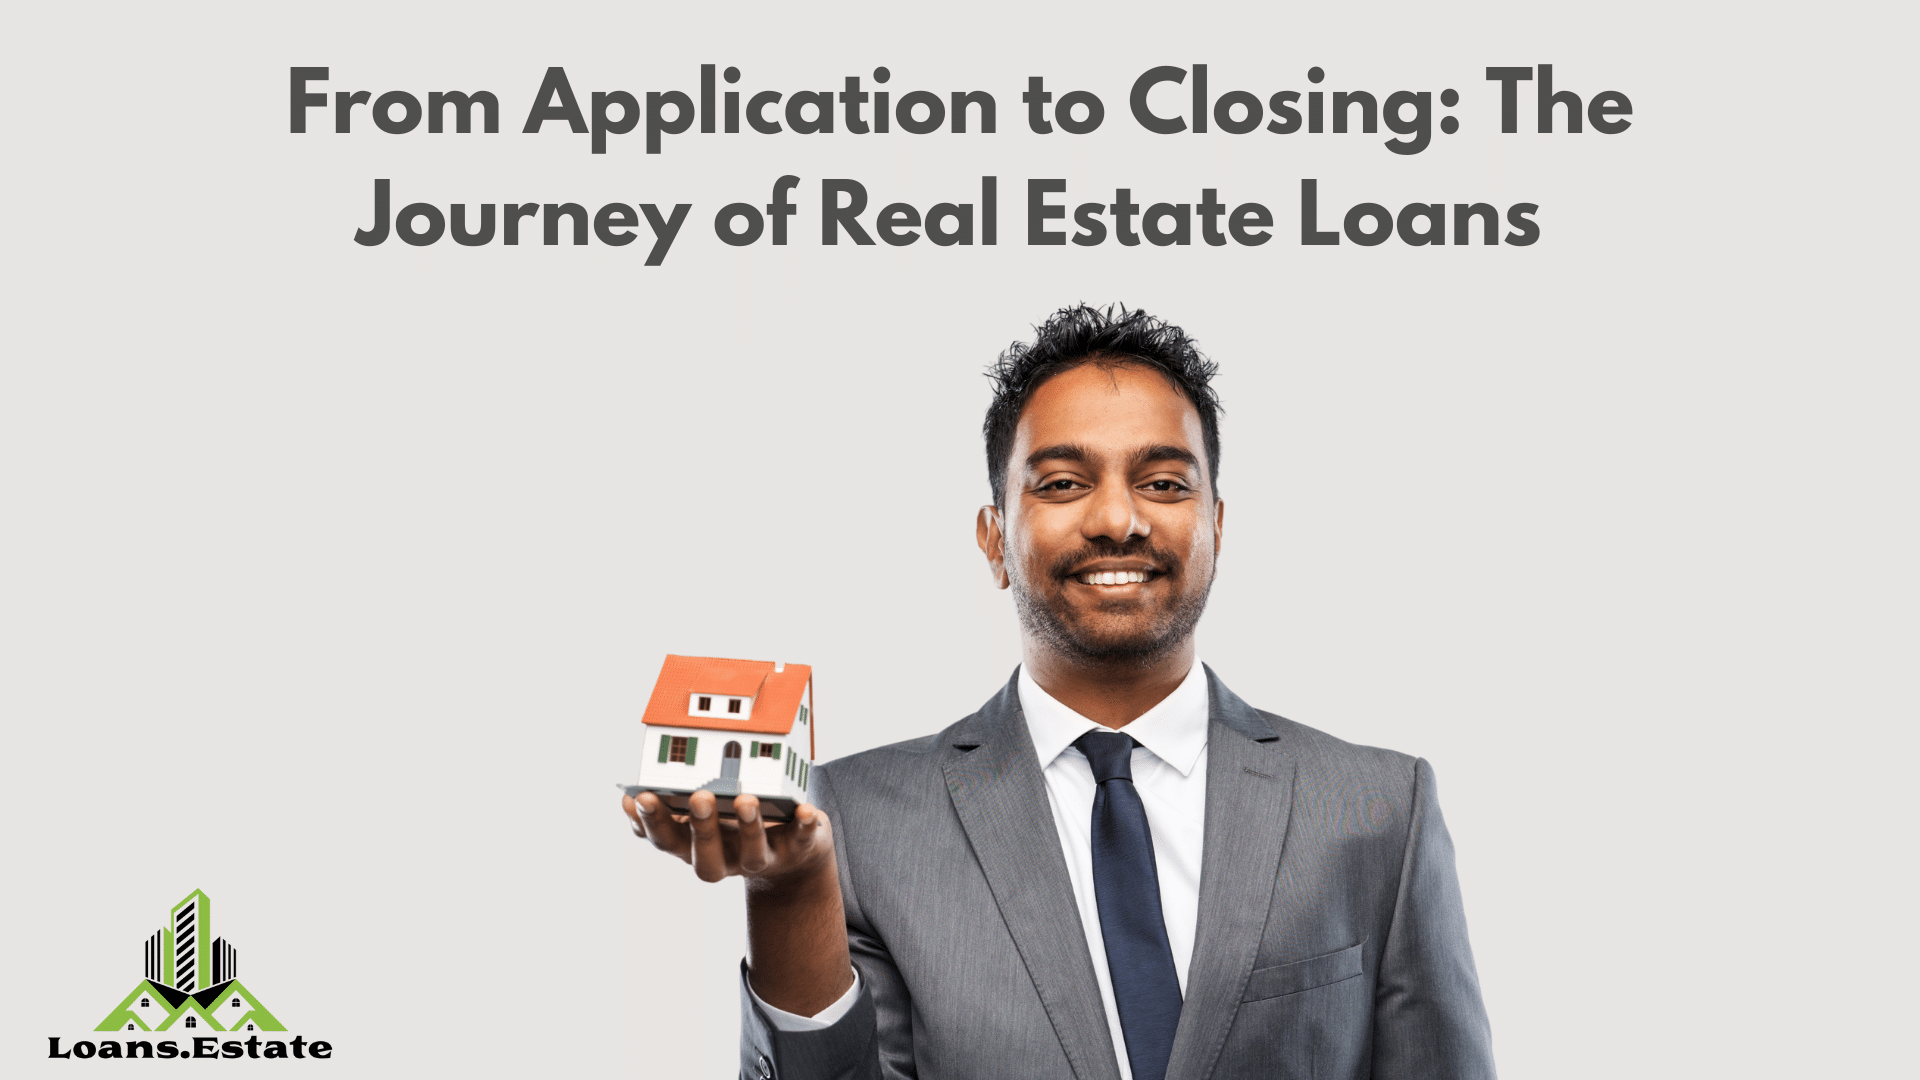 From Application to Closing: The Journey of Real Estate Loans